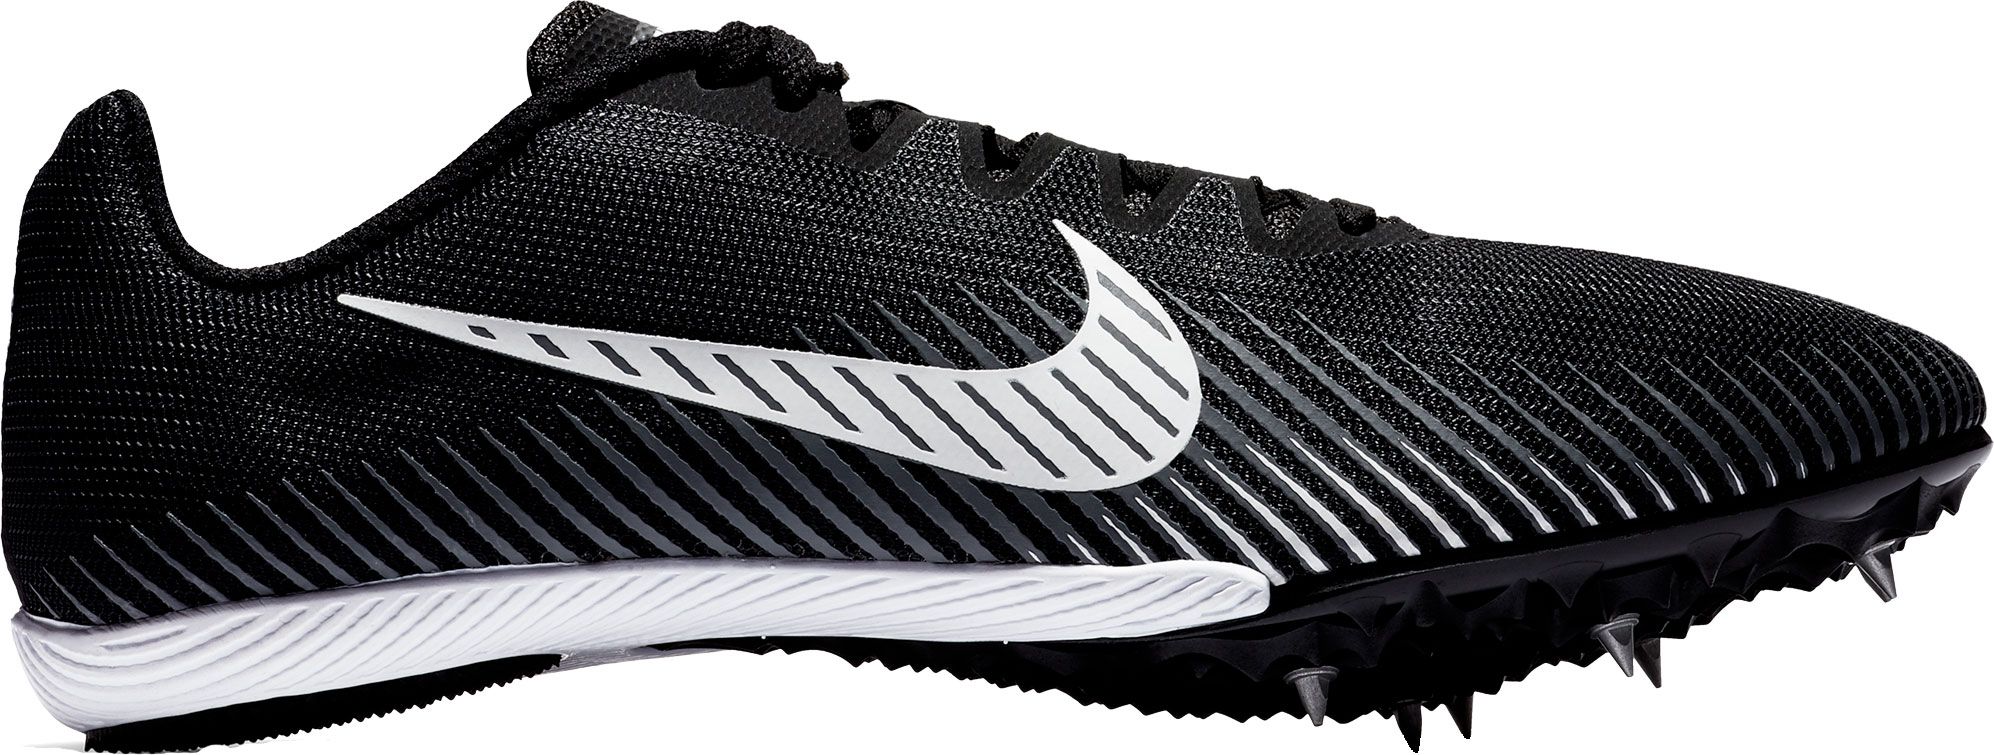 men's sprinting shoes